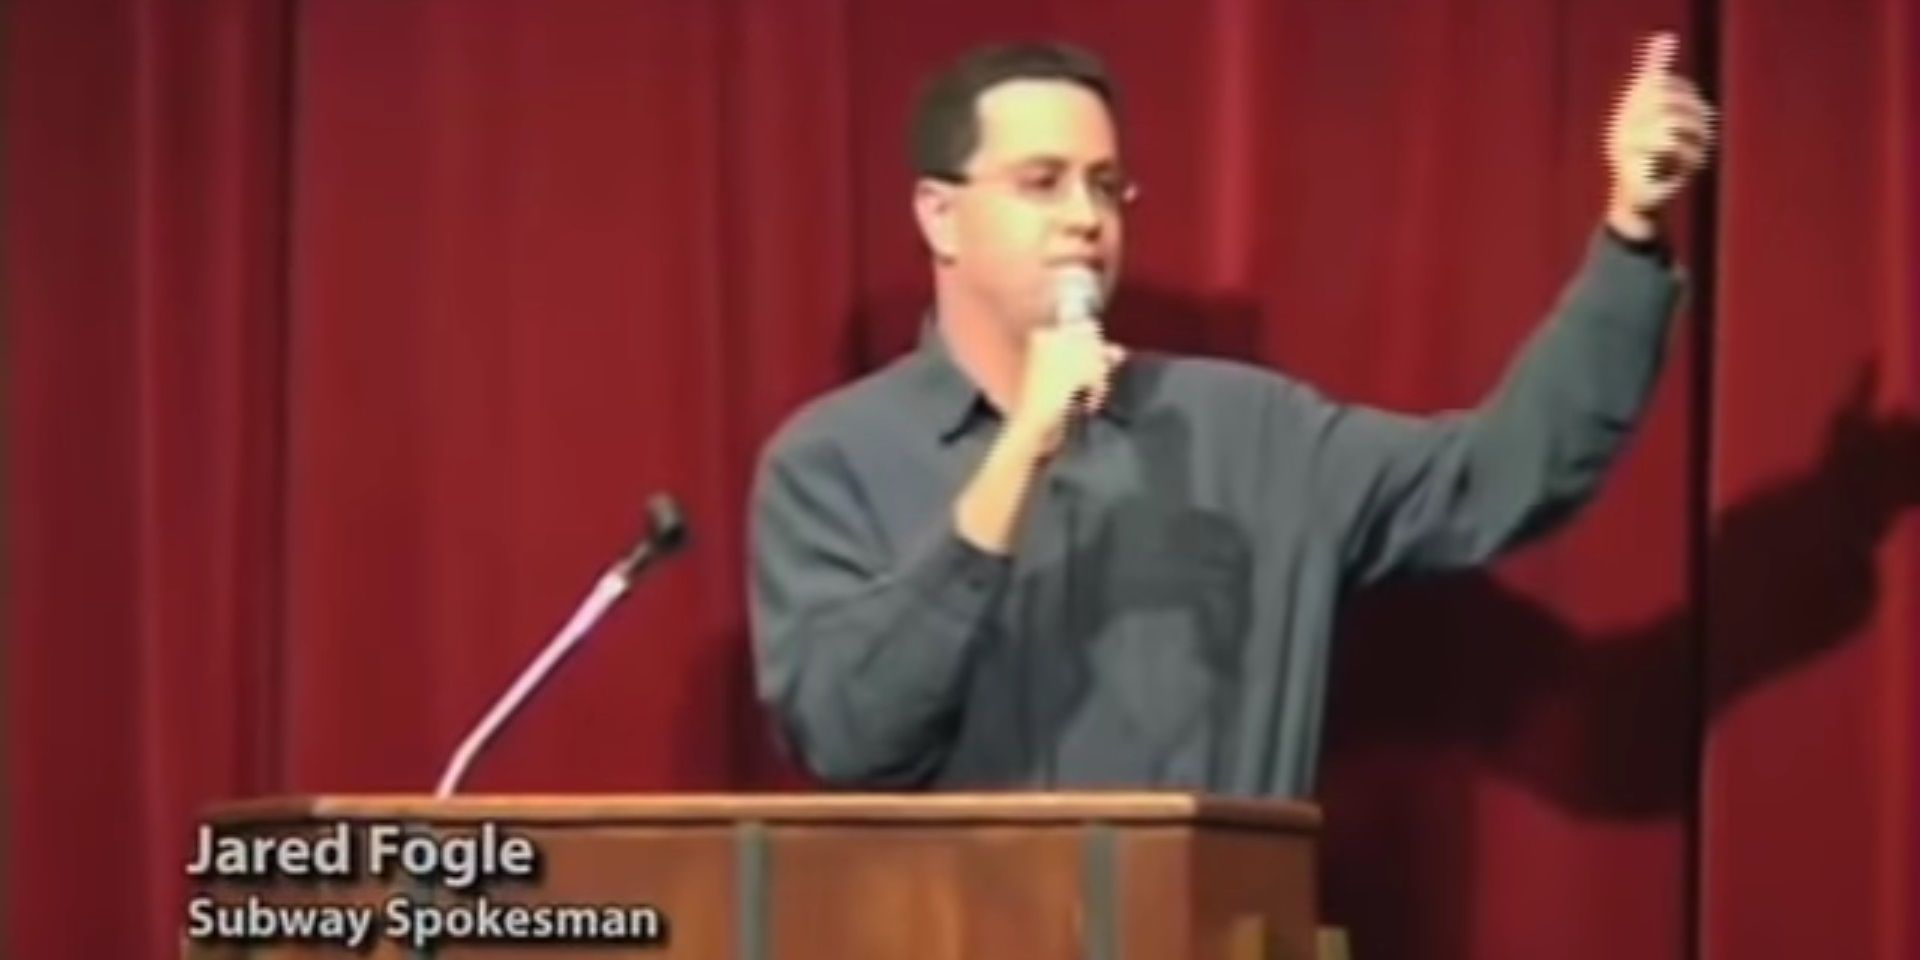 Jared Fogle gives a speech in Super Size Me